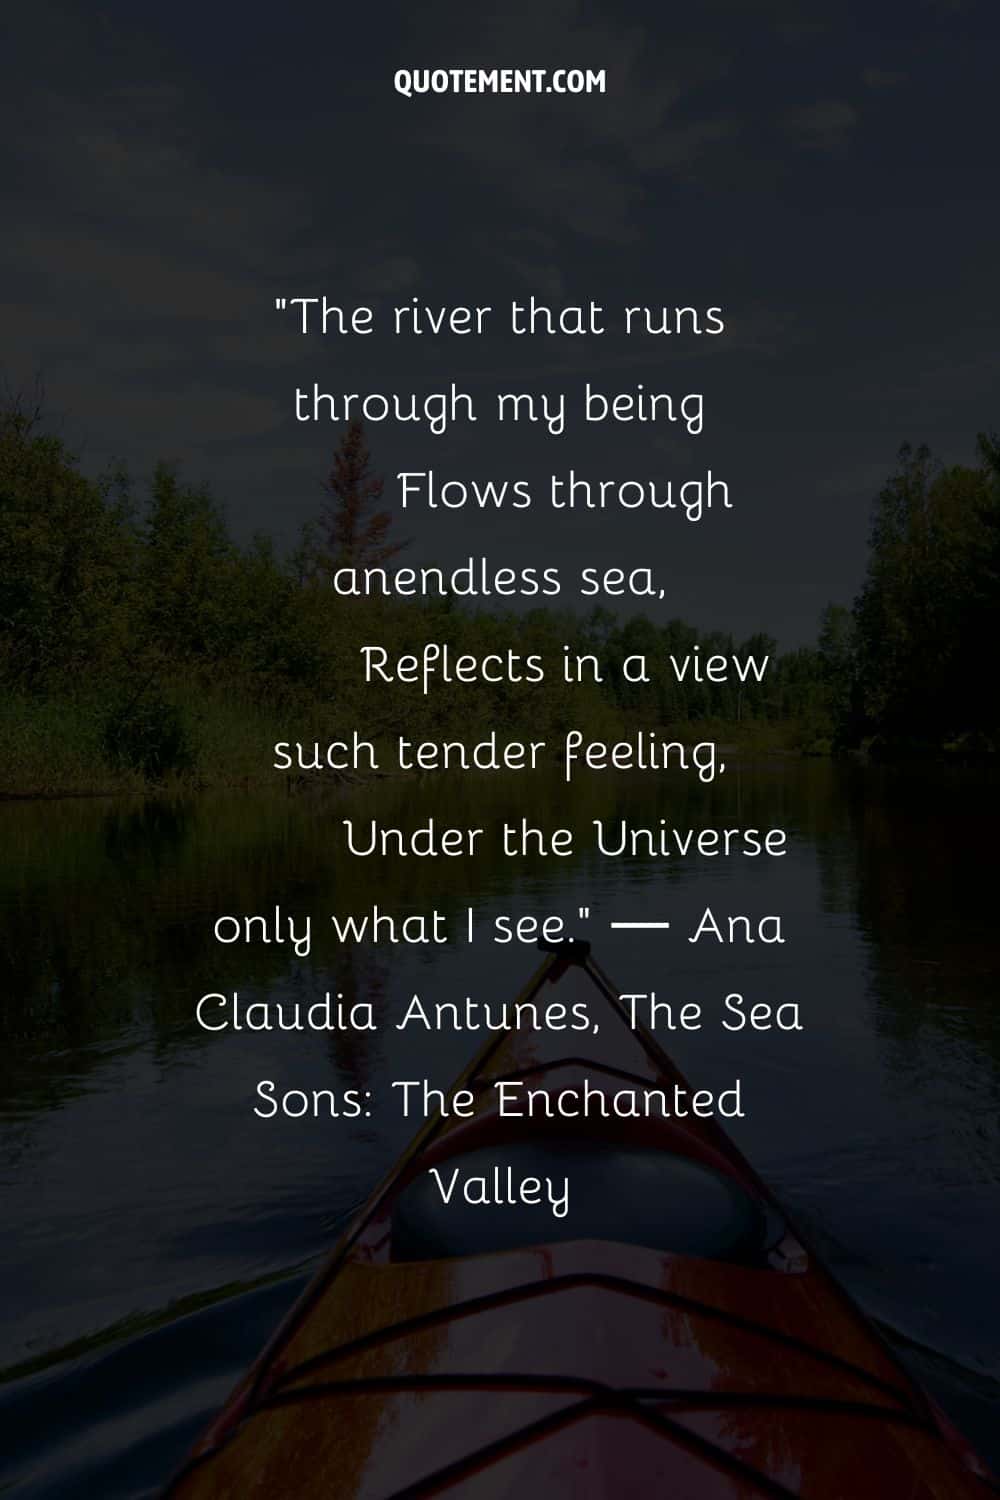 Paddling through scenic river beauty representing river flow quote